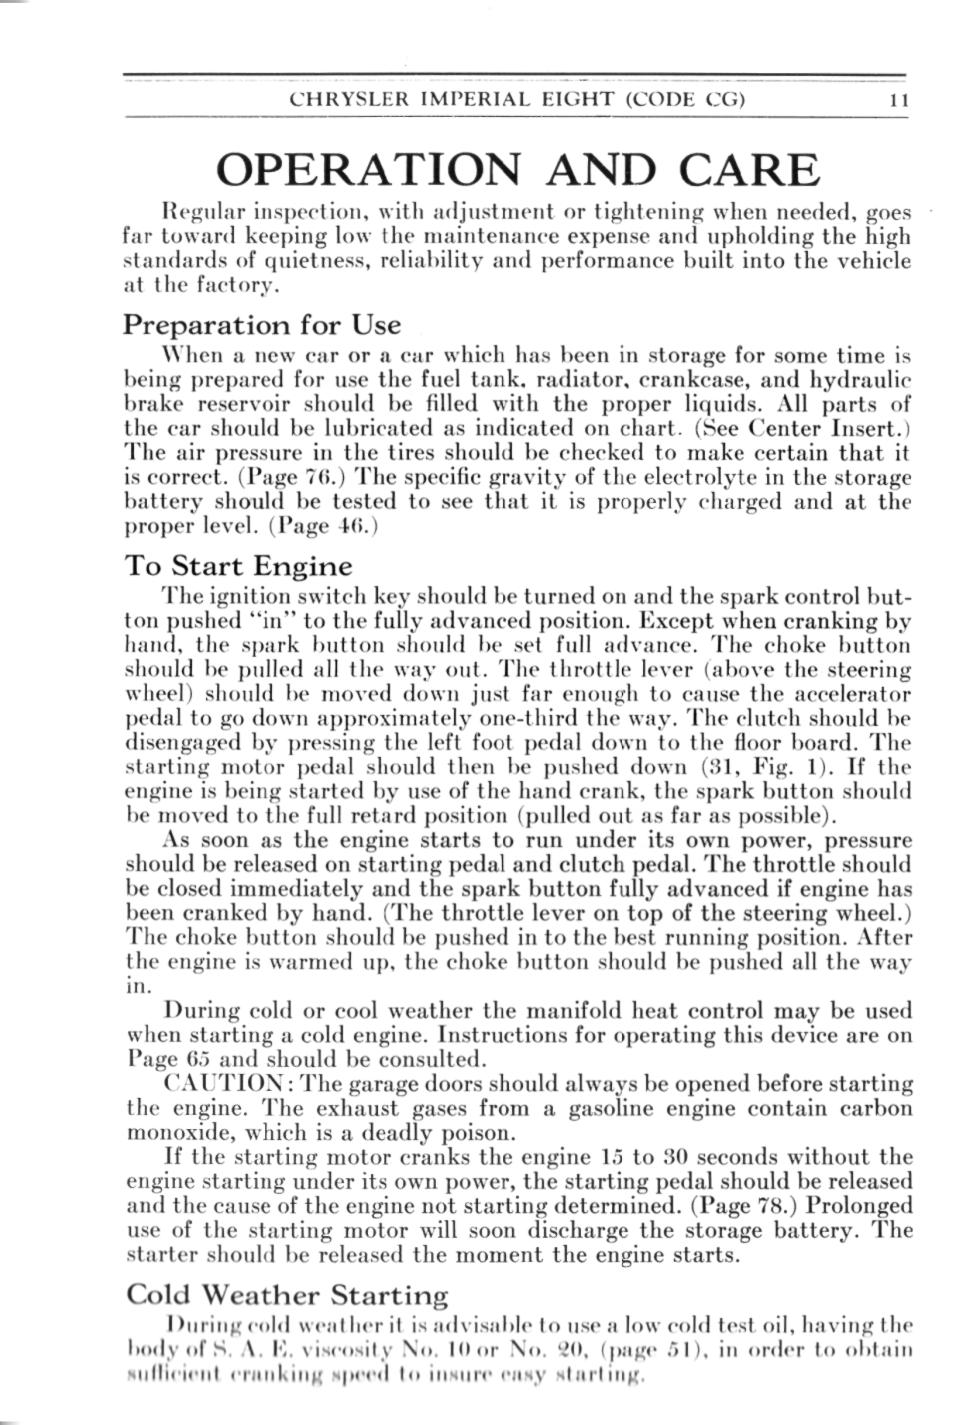 1931 Chrysler Imperial Owners Manual Page 61